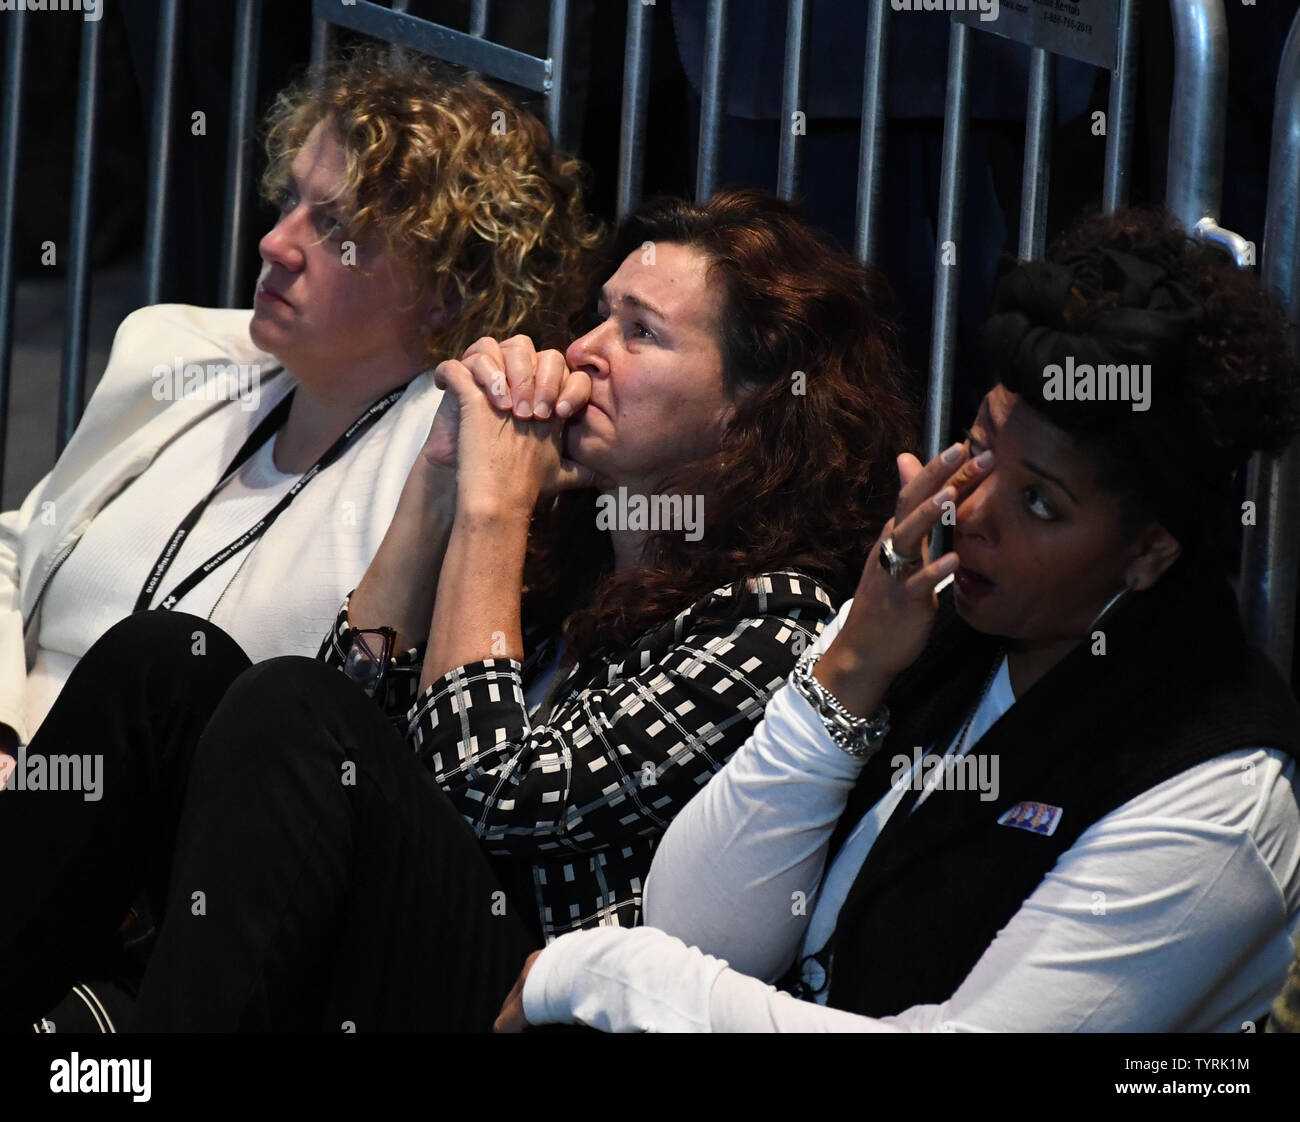 Supporters react as results are announced during Democratic presidential candidate Hillary Clinton's election night rally at the Javits Center in New York on November 8, 2016.          Photo by Pat Benic/UPI Stock Photo